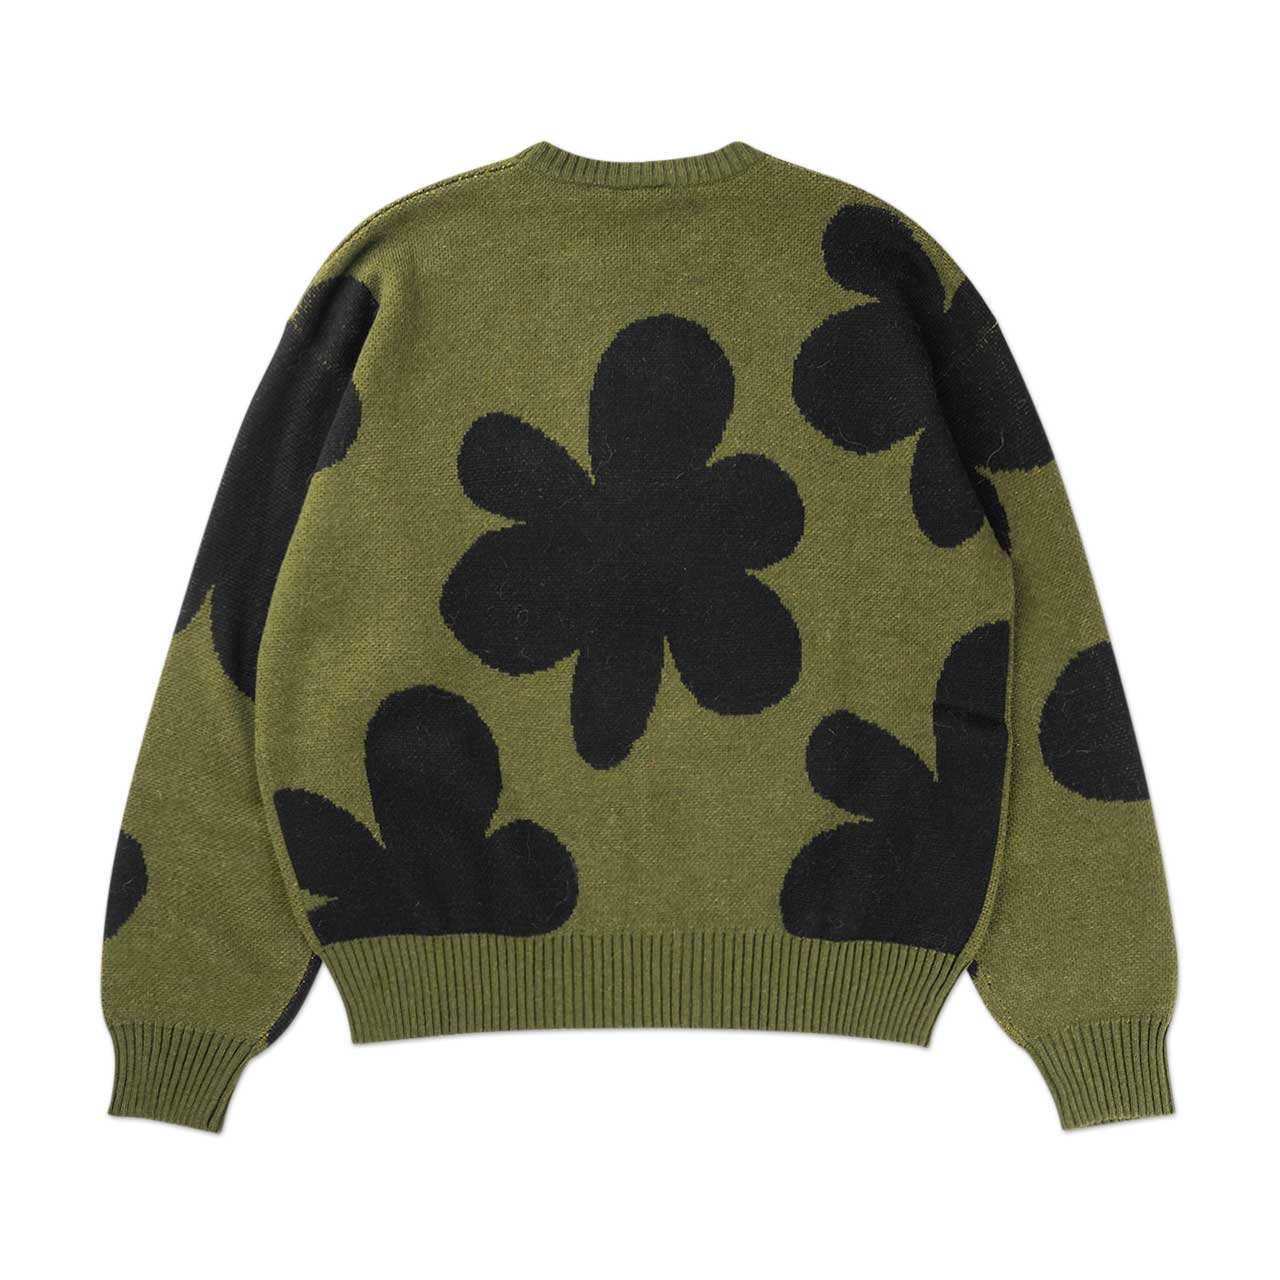 perks and mini shadow cast knitted jumper (khaki) - 8581-k - a.plus - Image - 2